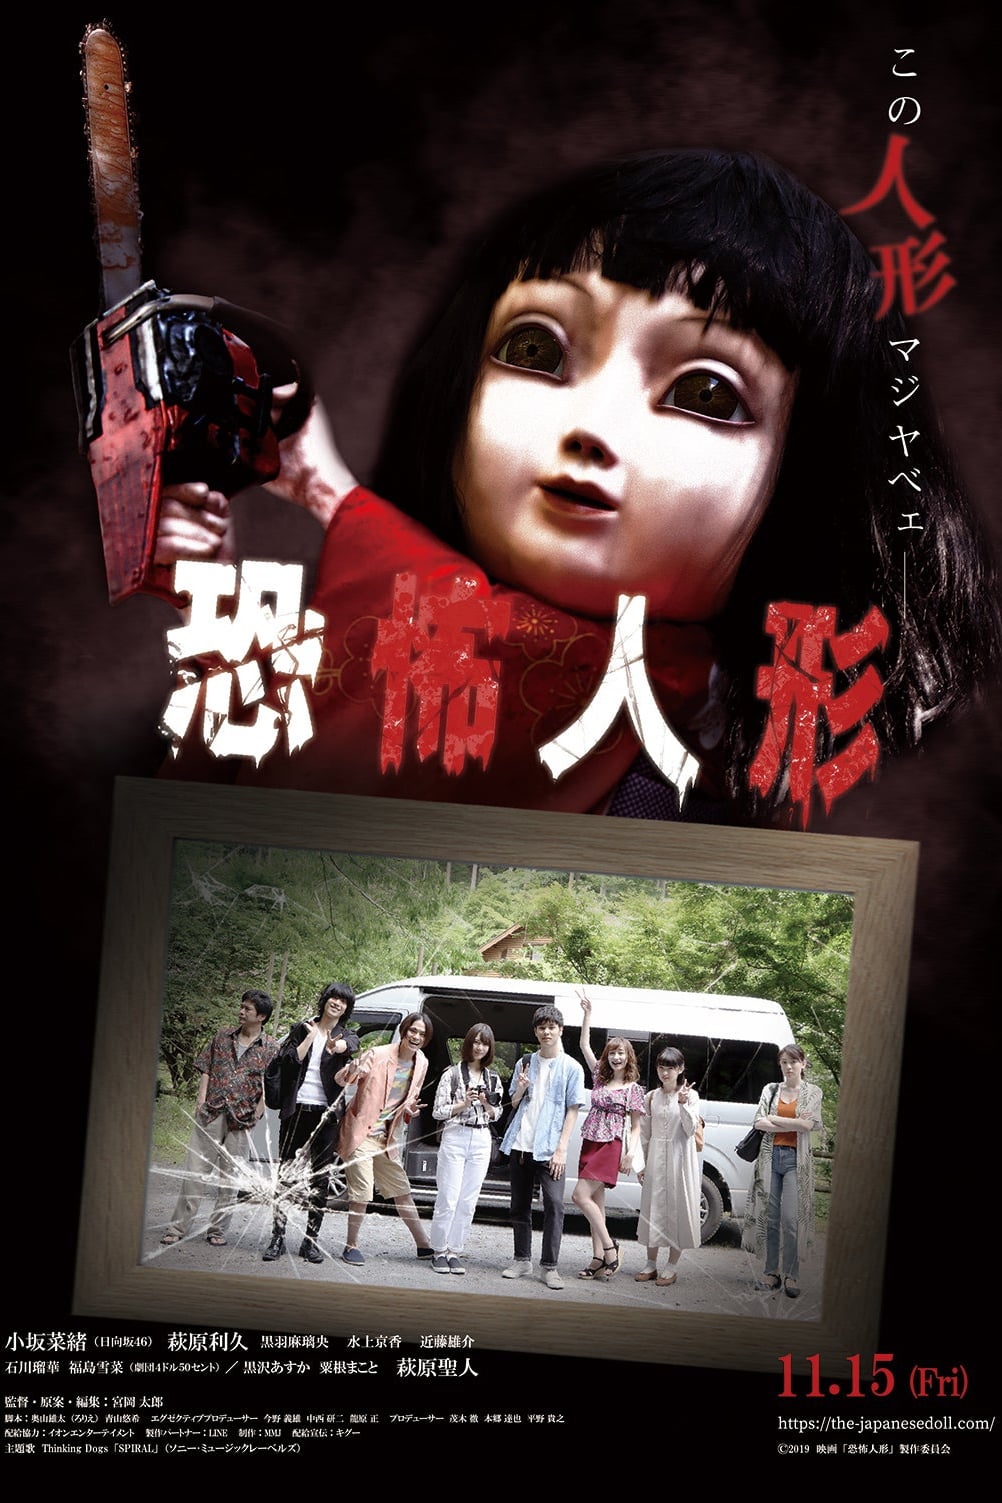 The Japanese Doll (2019)